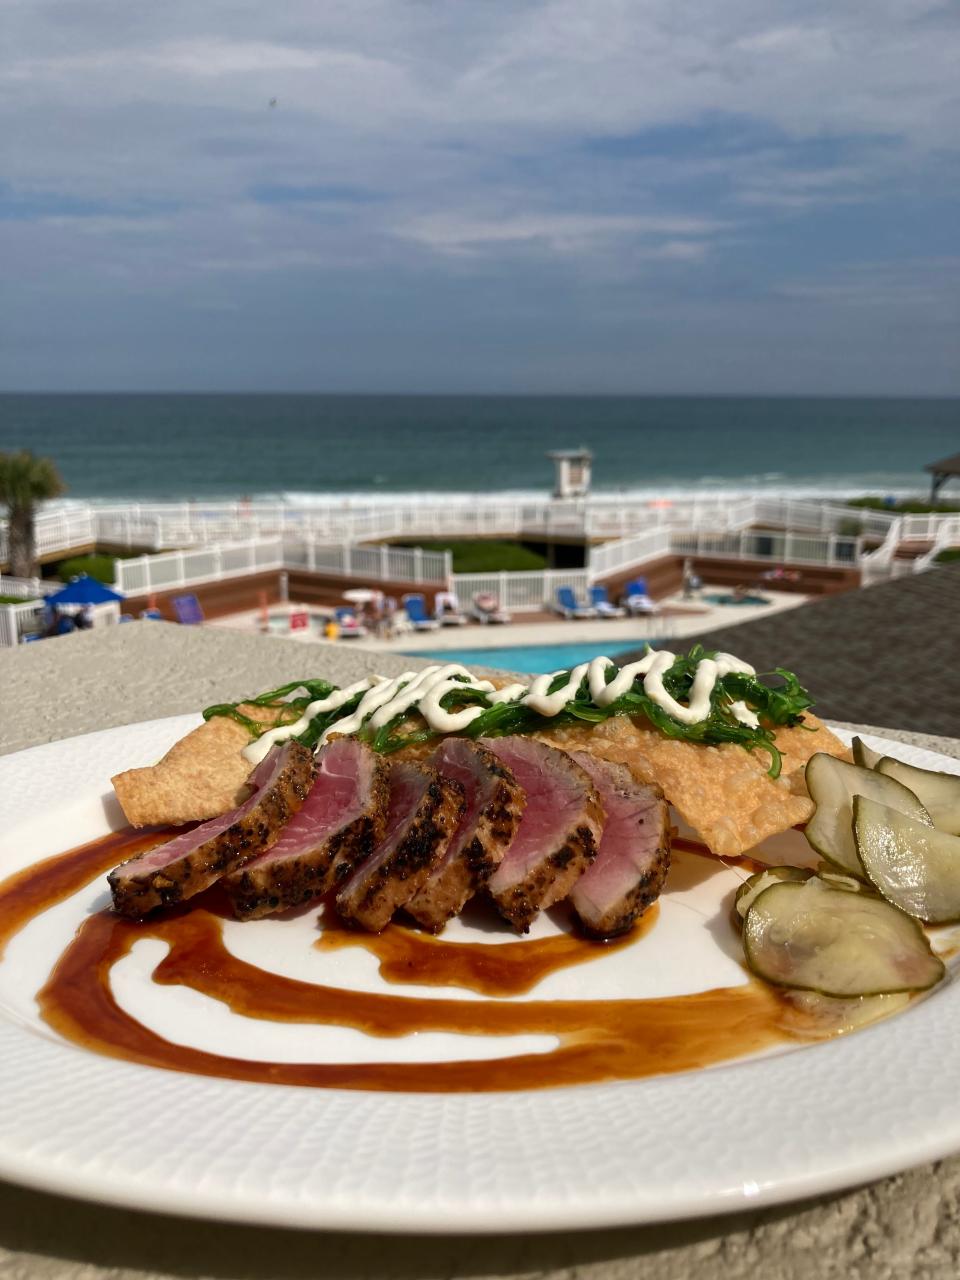 The Sesame Tuna appetizer at Solstice Oceanfront Kitchen + Cocktails restaurant, at the newly renovated Lumina on Wrightsville Beach Holiday Inn Resort at 1706 N. Lumina Ave. in Wrightsville Beach, N.C. on June 23, 2022.